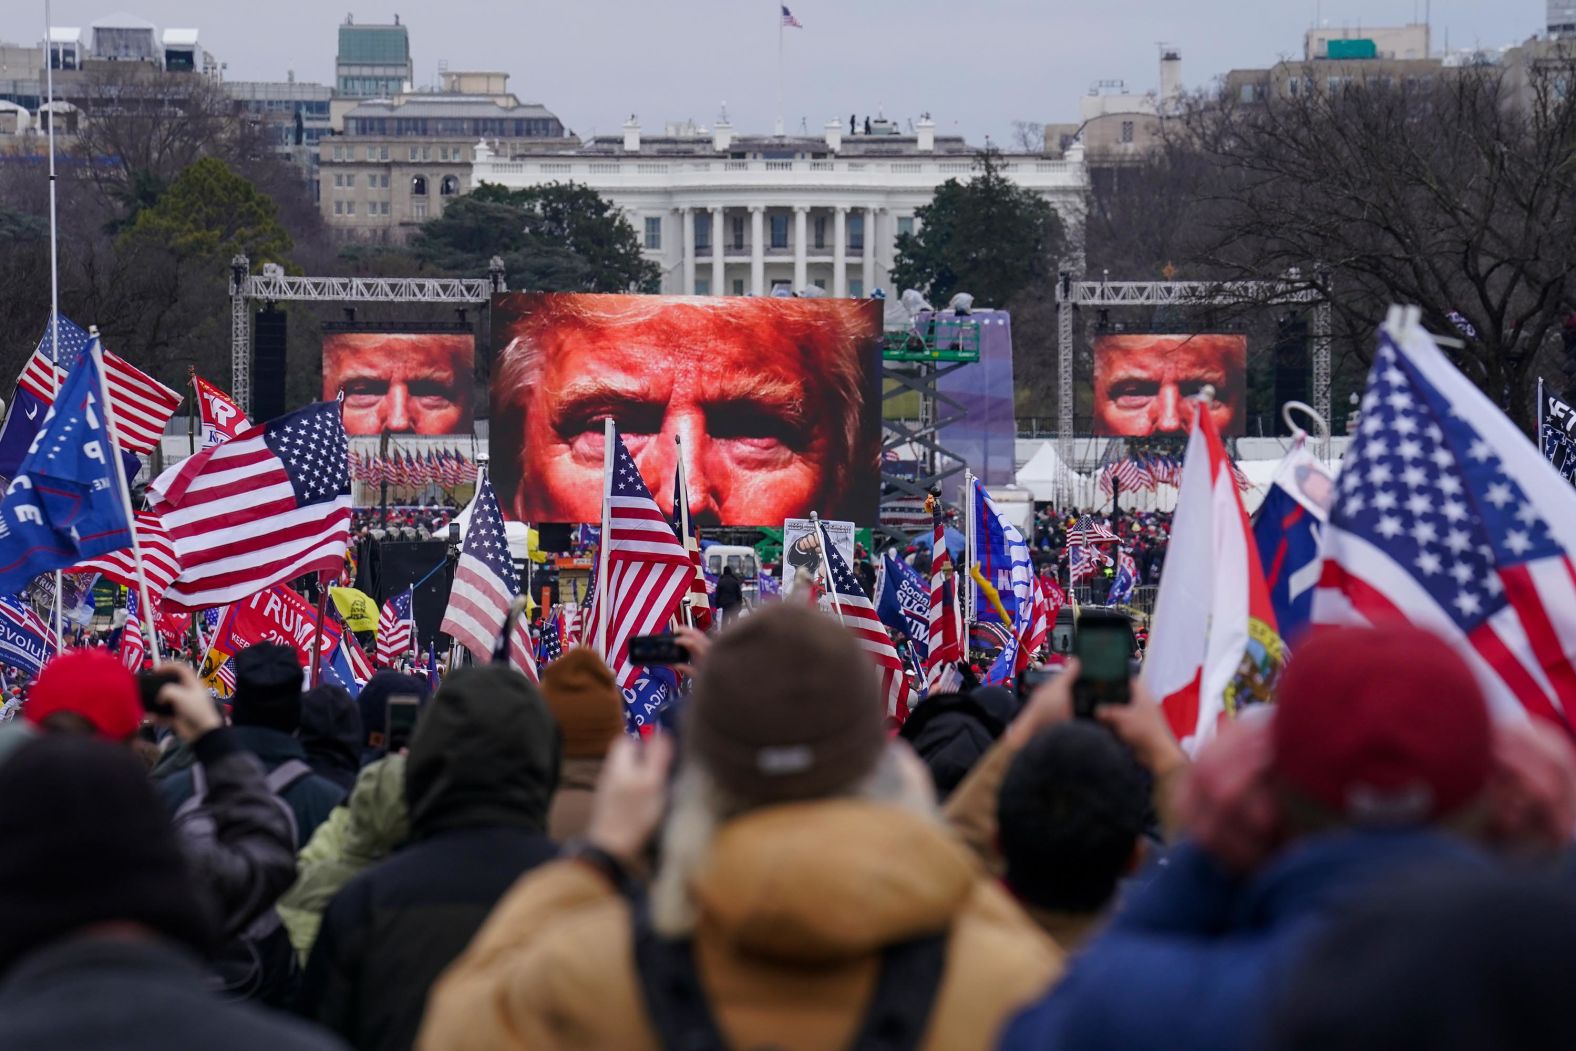 Before the riot, Trump supporters participated in a rally near the White House. Congress was going to be meeting later that day <a href="index.php?page=&url=https%3A%2F%2Fwww.cnn.com%2Finteractive%2F2020%2Fpolitics%2Fus-presidential-election-race-like-no-other%2Finsurrection_second_impeachment.html" target="_blank">to certify the Electoral College's votes for president and vice president,</a> and multiple Senate Republicans were planning to raise objections to the count as Trump continued to push false conspiracy theories that the election was rigged against him. At the rally, Trump encouraged his supporters to march on the Capitol to challenge the final certification of Joe Biden's electoral victory. "If you don't fight like hell, you're not going to have a country anymore," he said during his speech.